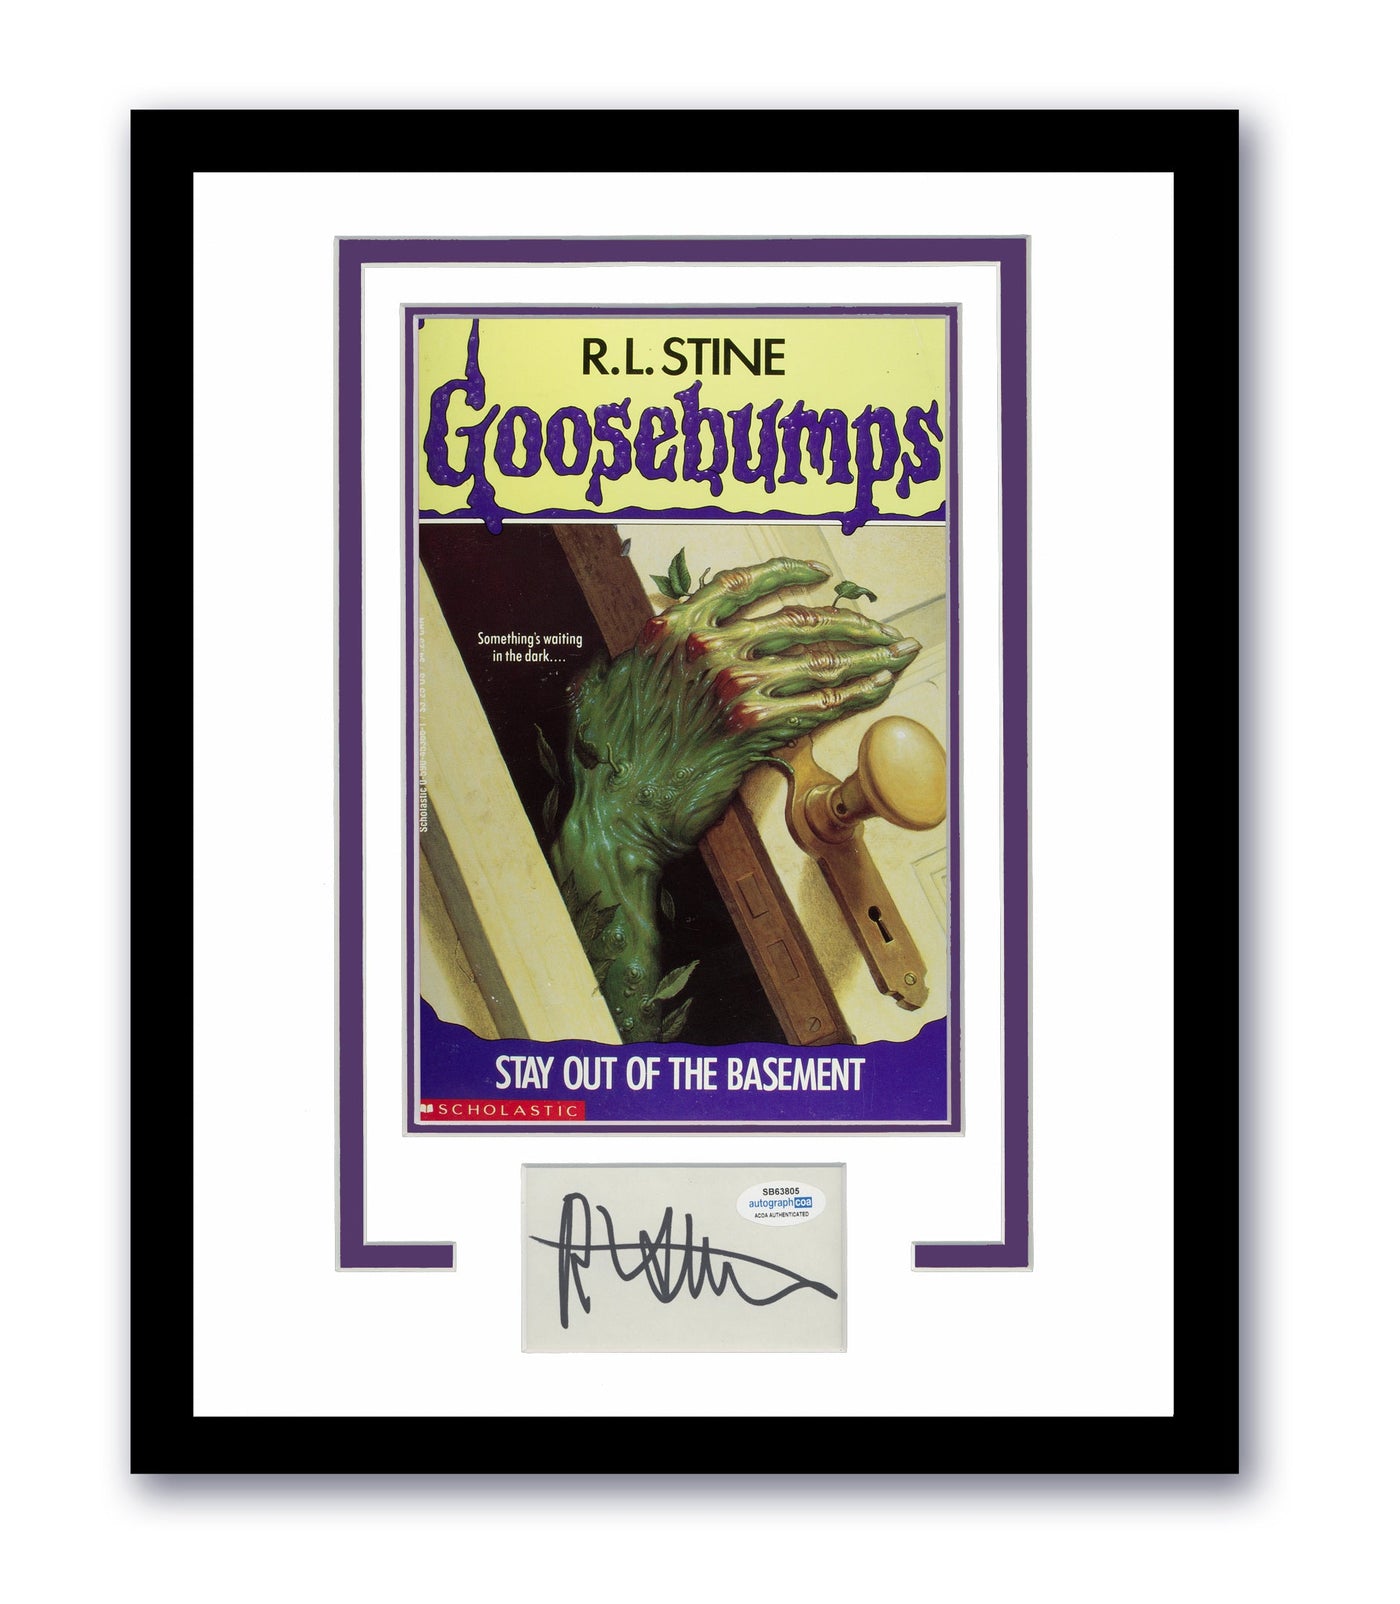 Goosebumps R.L. Stine Signed 11x14 Framed Photo Stay Out Of The Basement ACOA